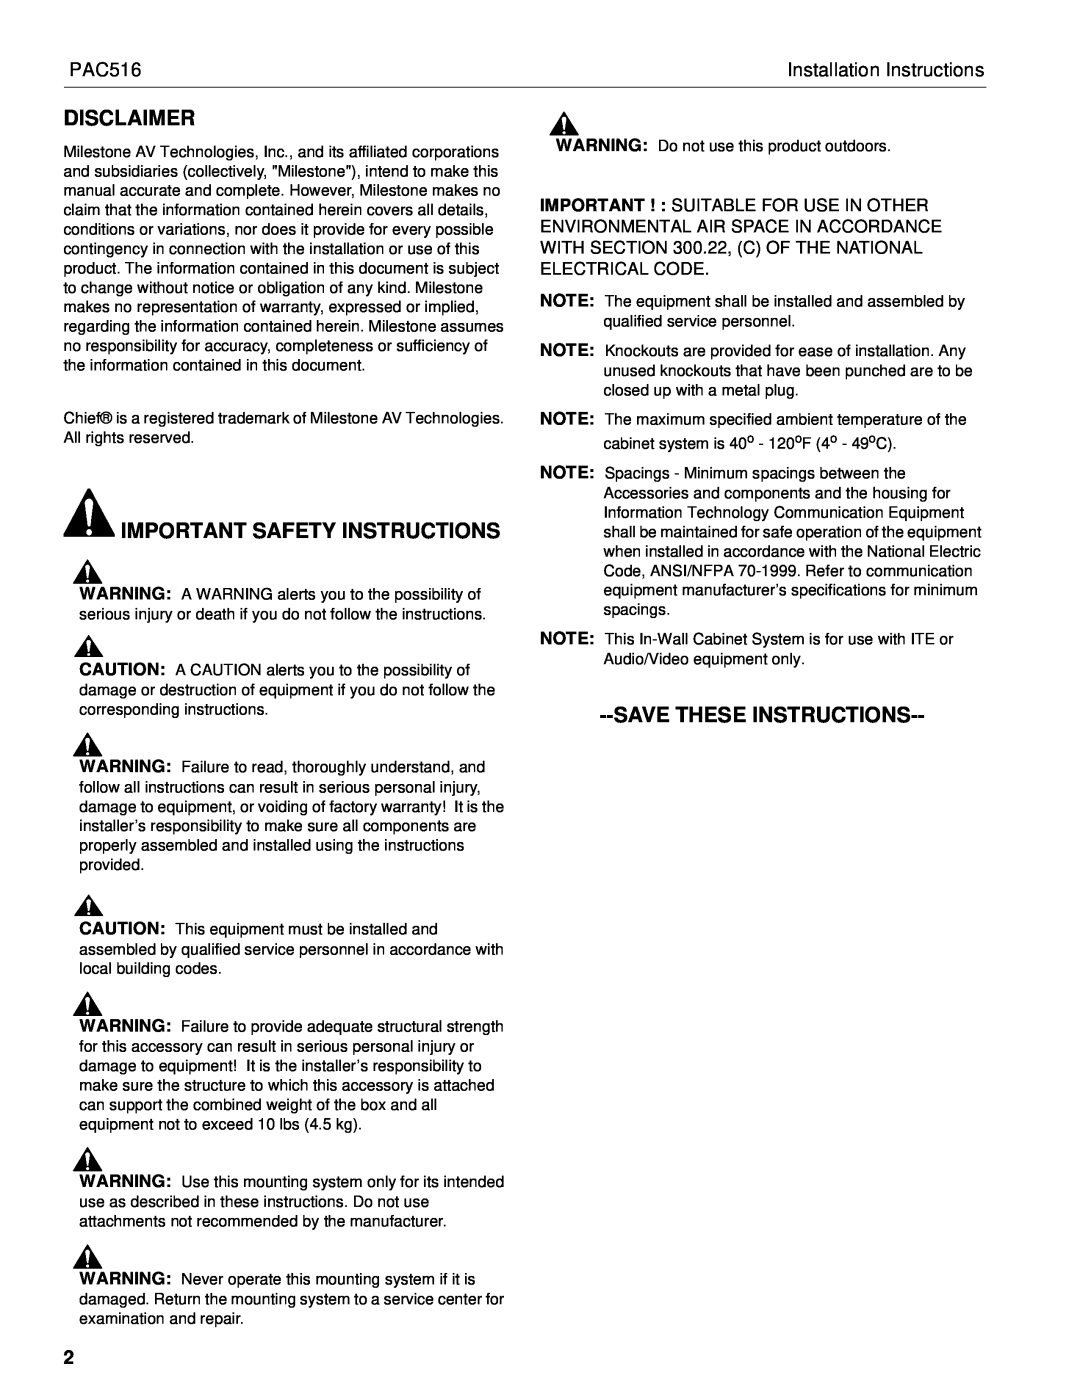 Chief Manufacturing PAC516 Disclaimer, Important Safety Instructions, Save These Instructions, Installation Instructions 